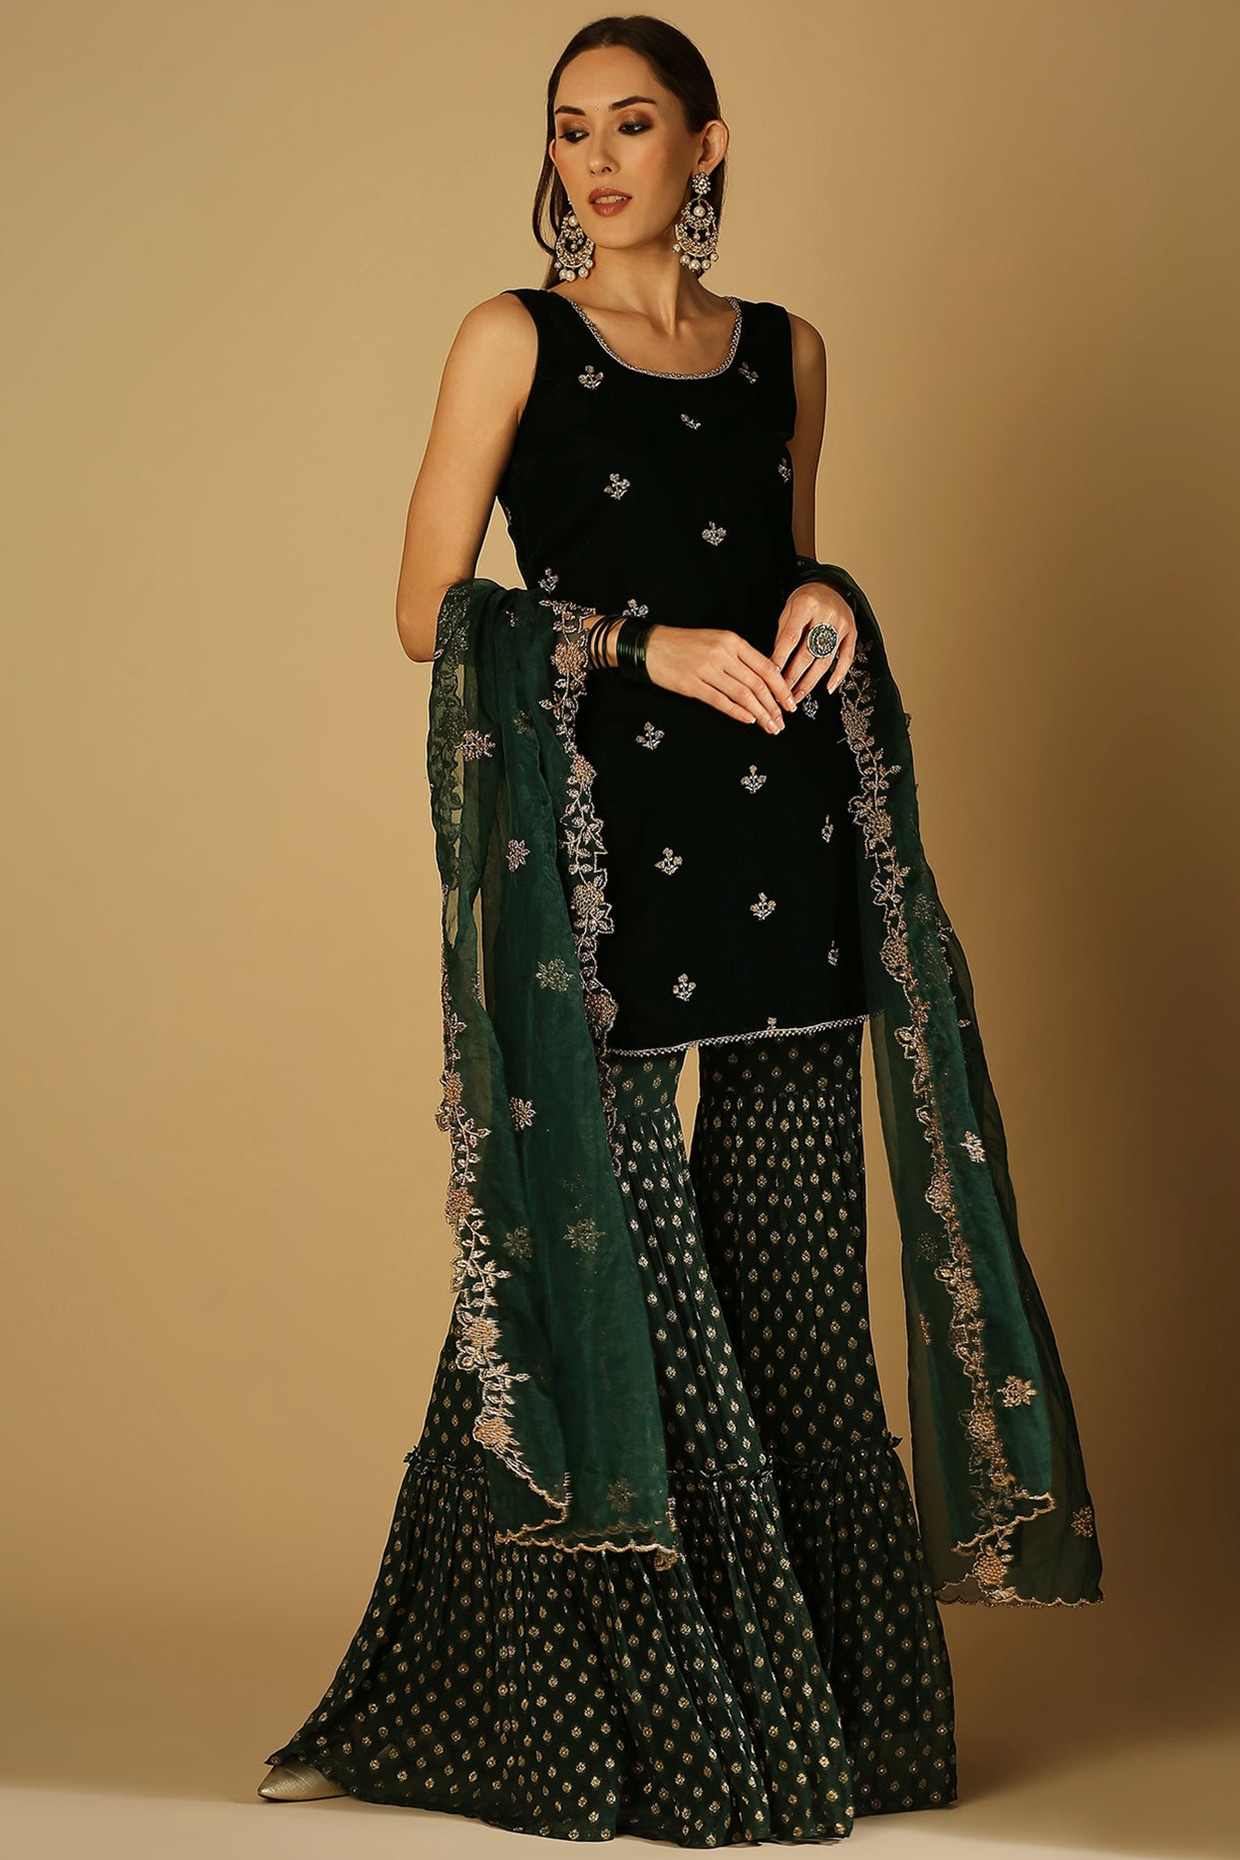 Sharara Designs for Wedding | The Indian Couture Blog